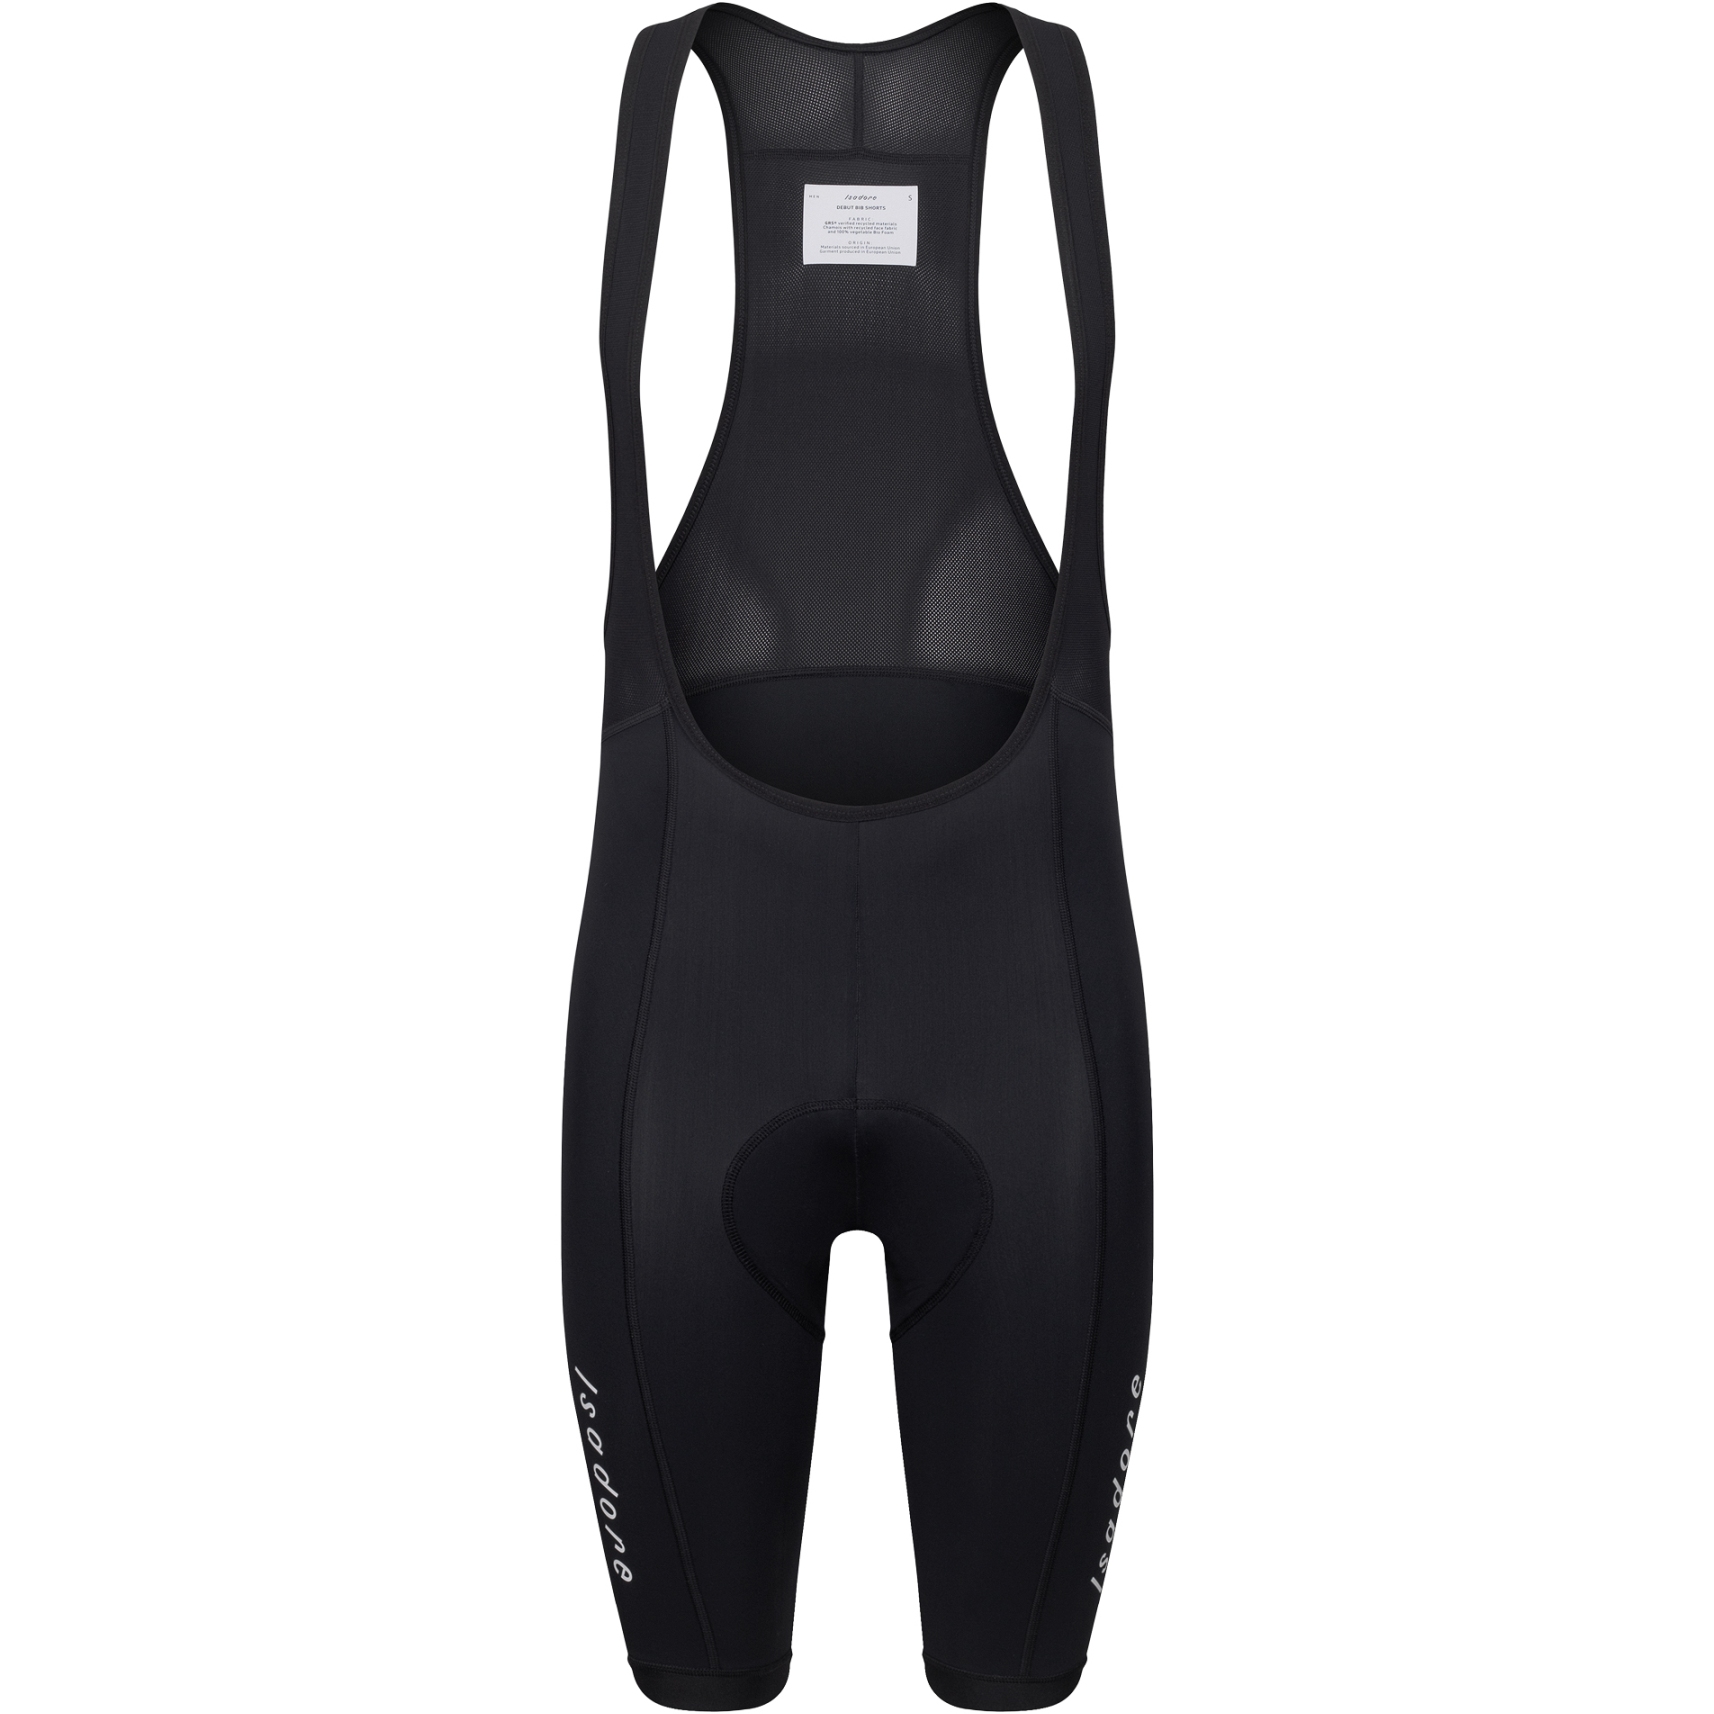 Picture of Isadore Debut 2.0 Bib Shorts - Black